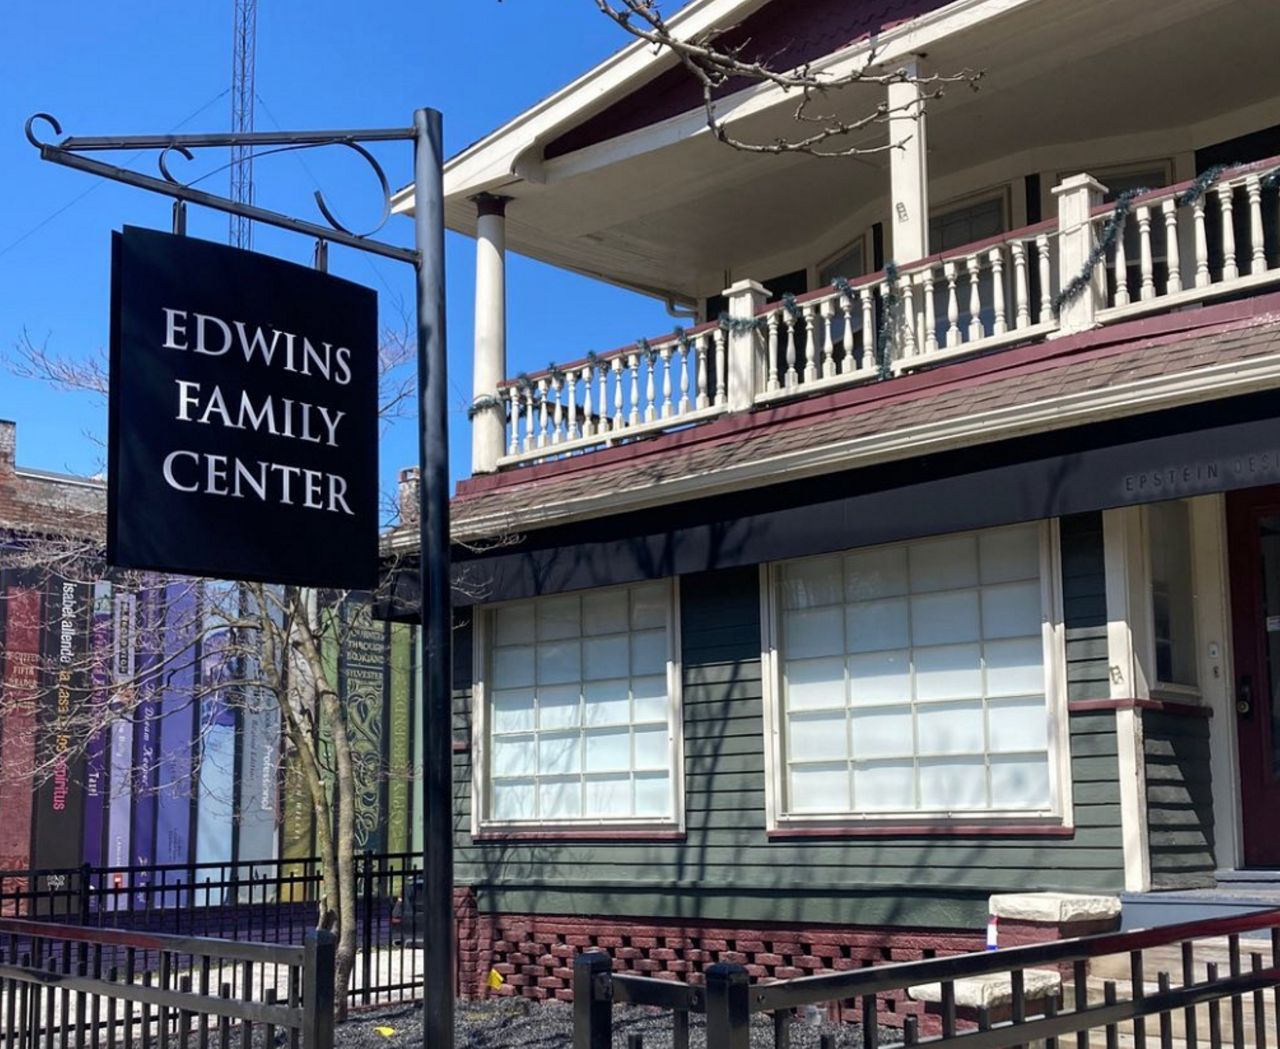 EDWINS is opening a family center to provide more resources for its students. (Photo courtesy of Edwins Leadership and Restaurant Institute)